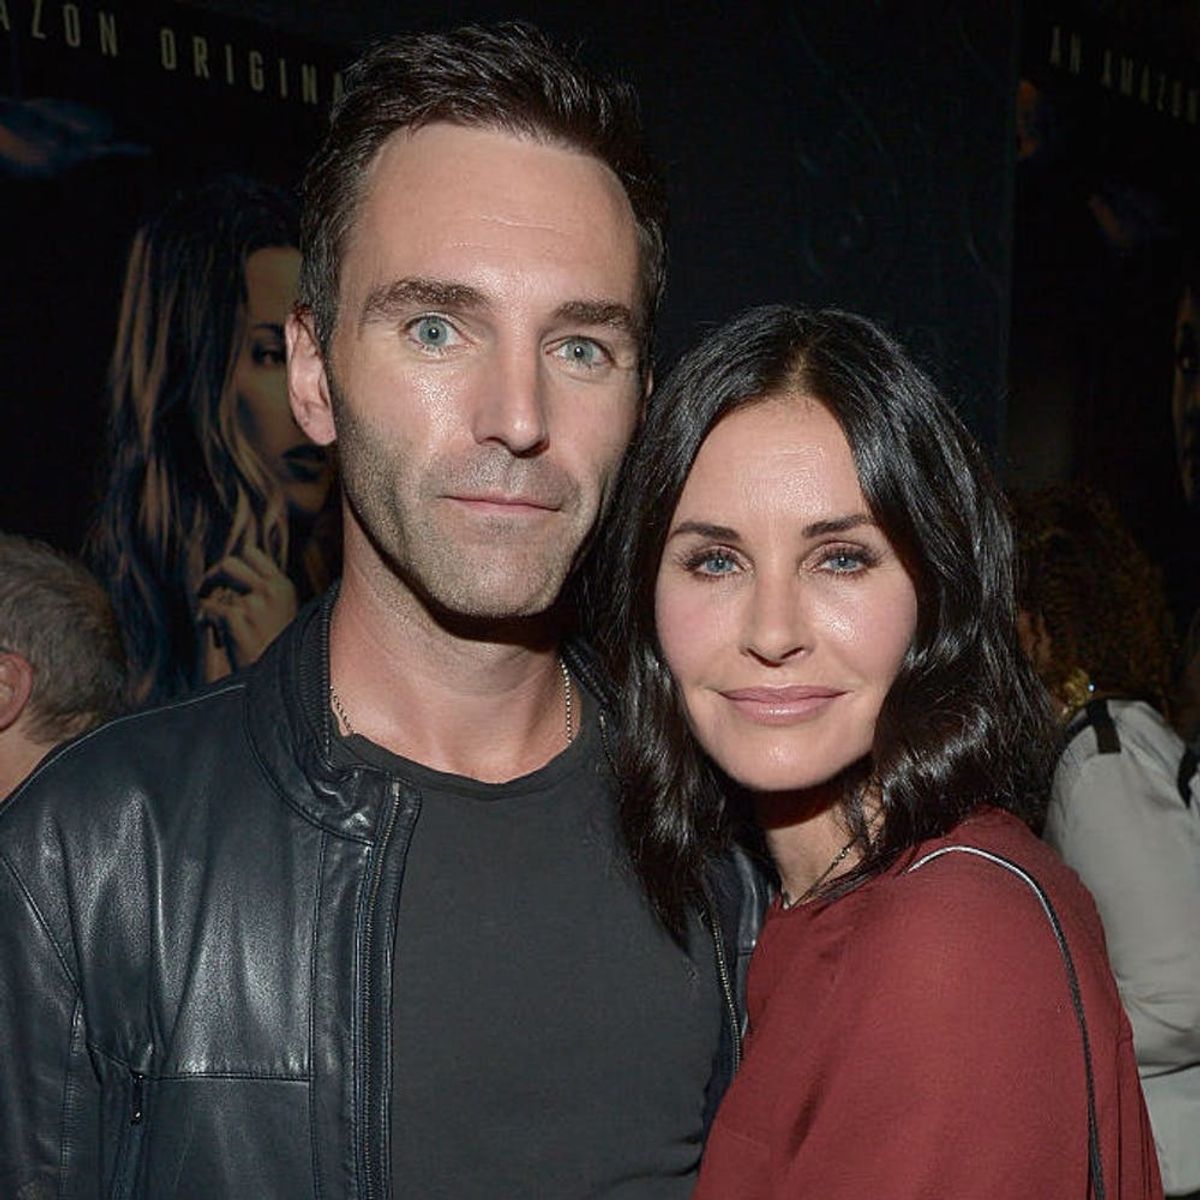 Courteney Cox “Would Love to” Have a Baby With Johnny McDaid